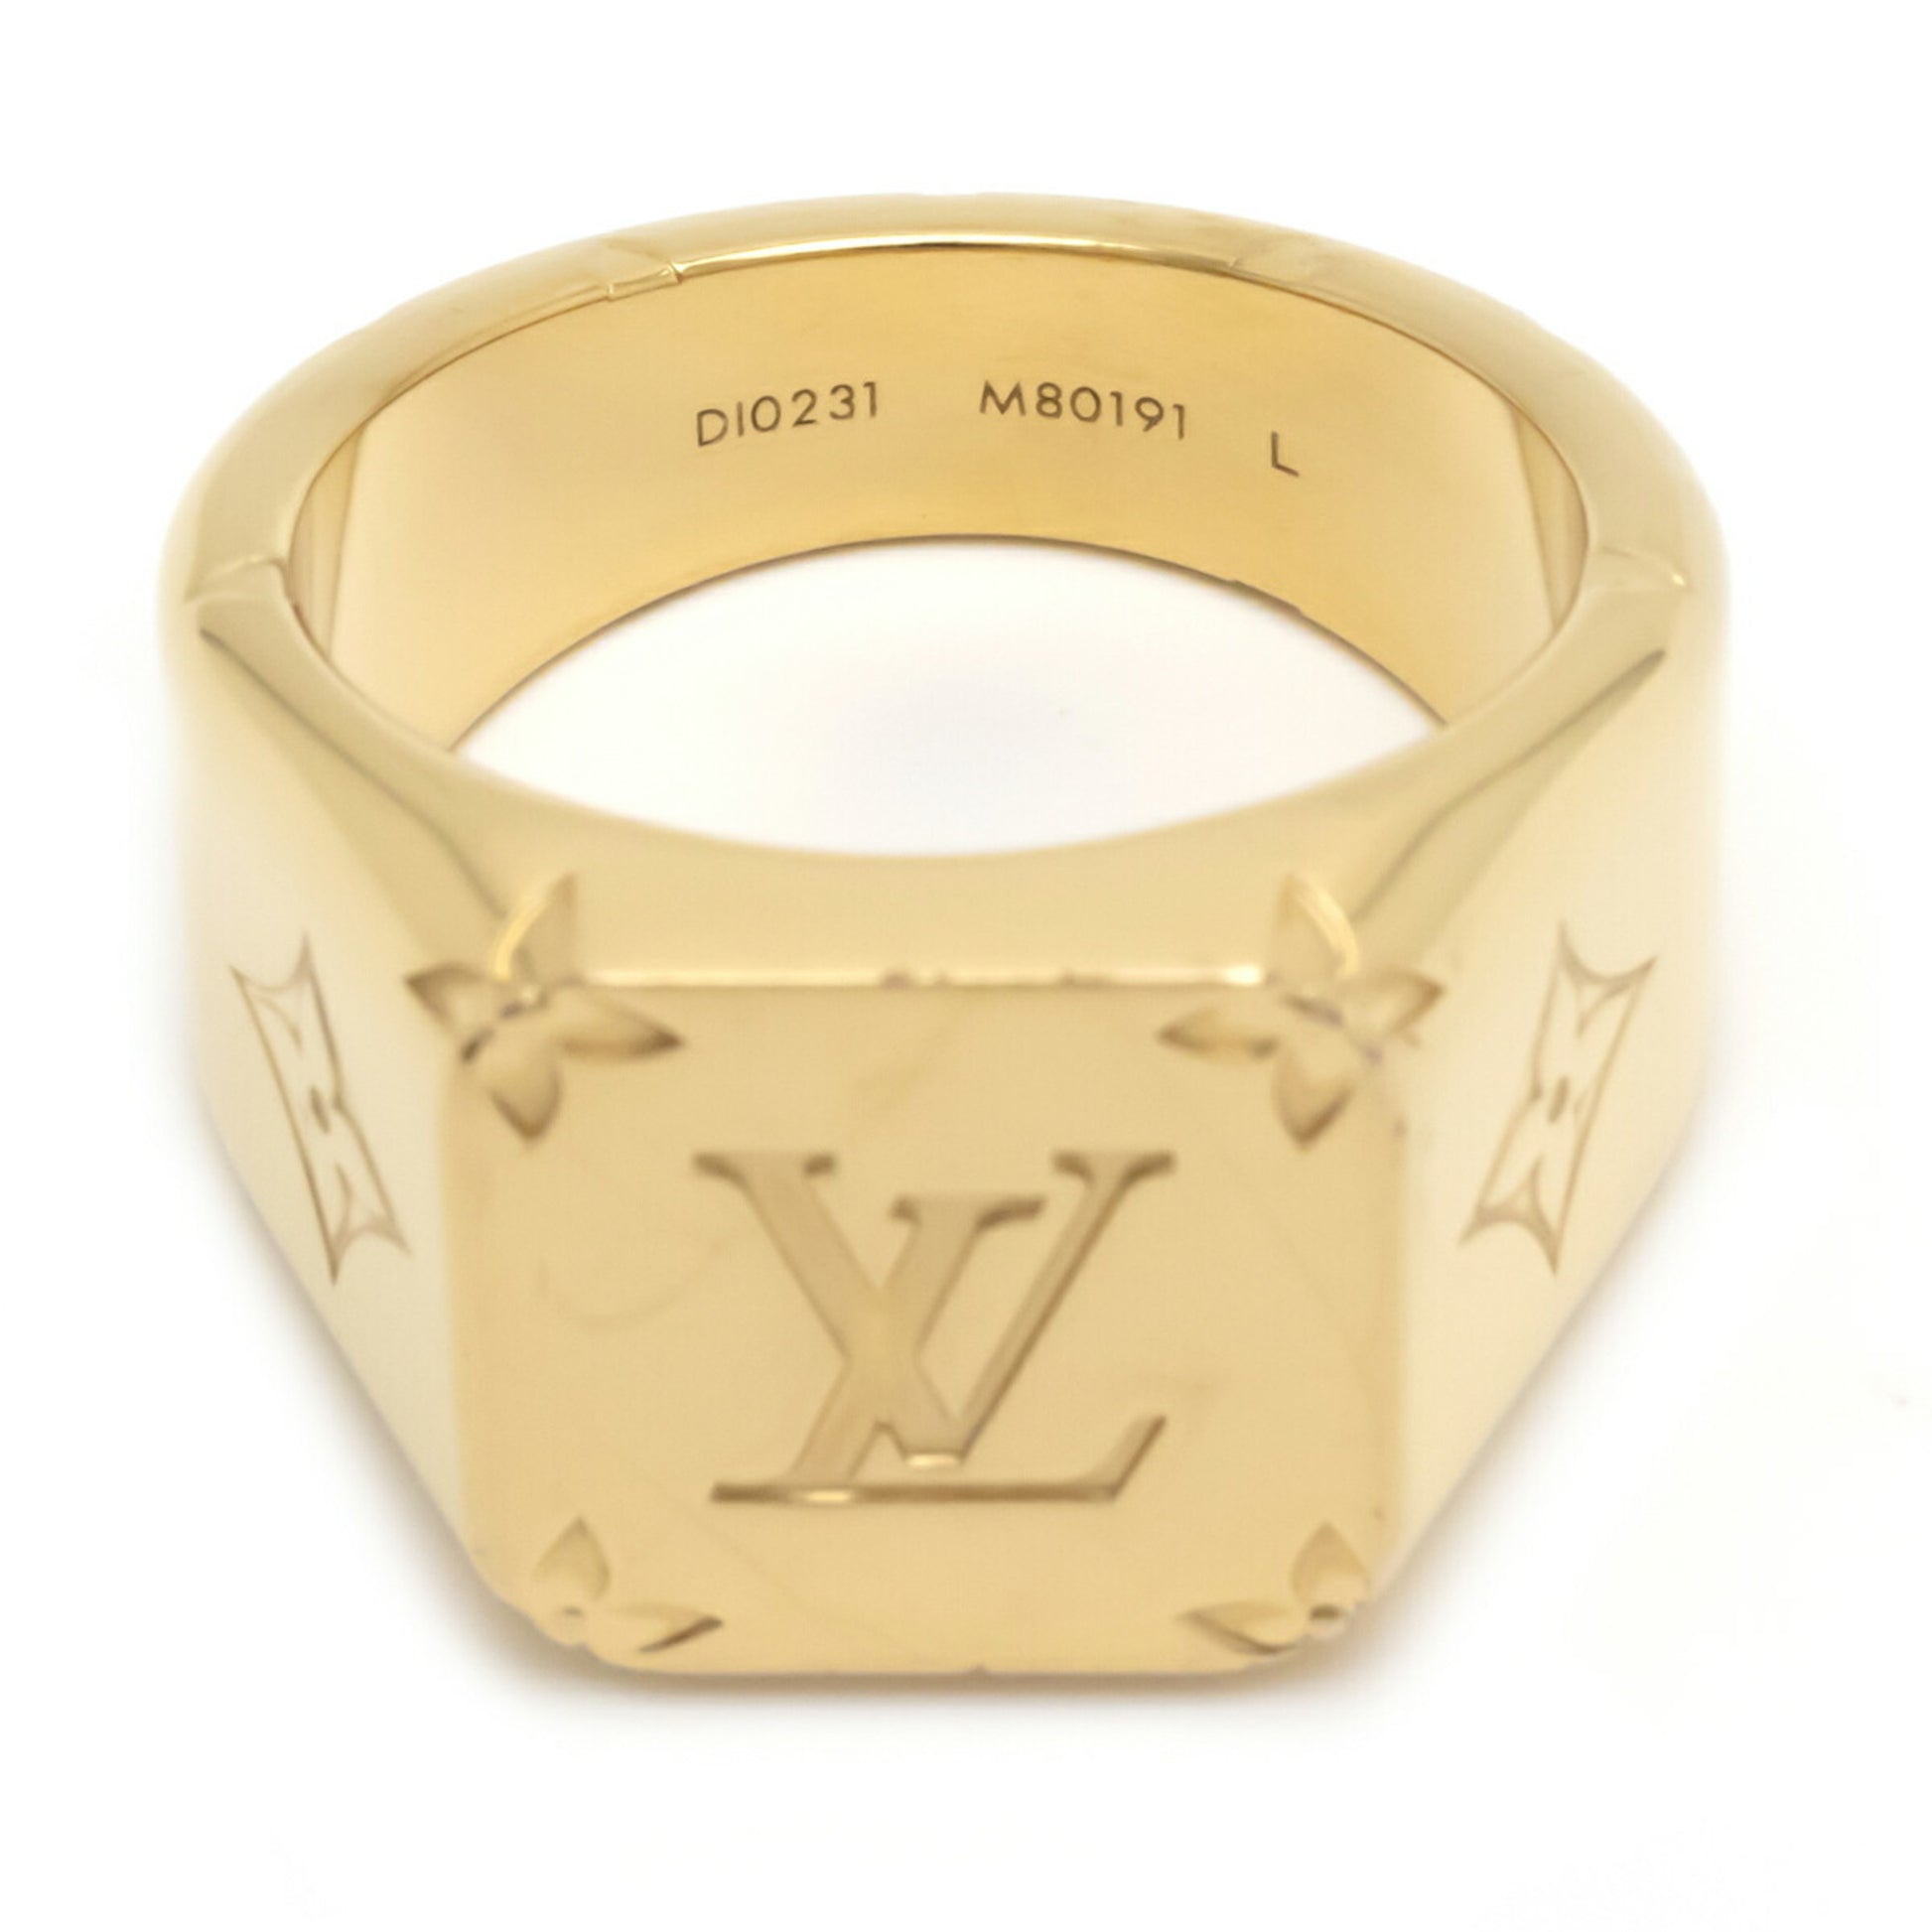 Authenticated Used LOUIS VUITTON Louis Vuitton Signet Ring Monogram Ring/ Ring M80191 Notation Size L Metal Gold 